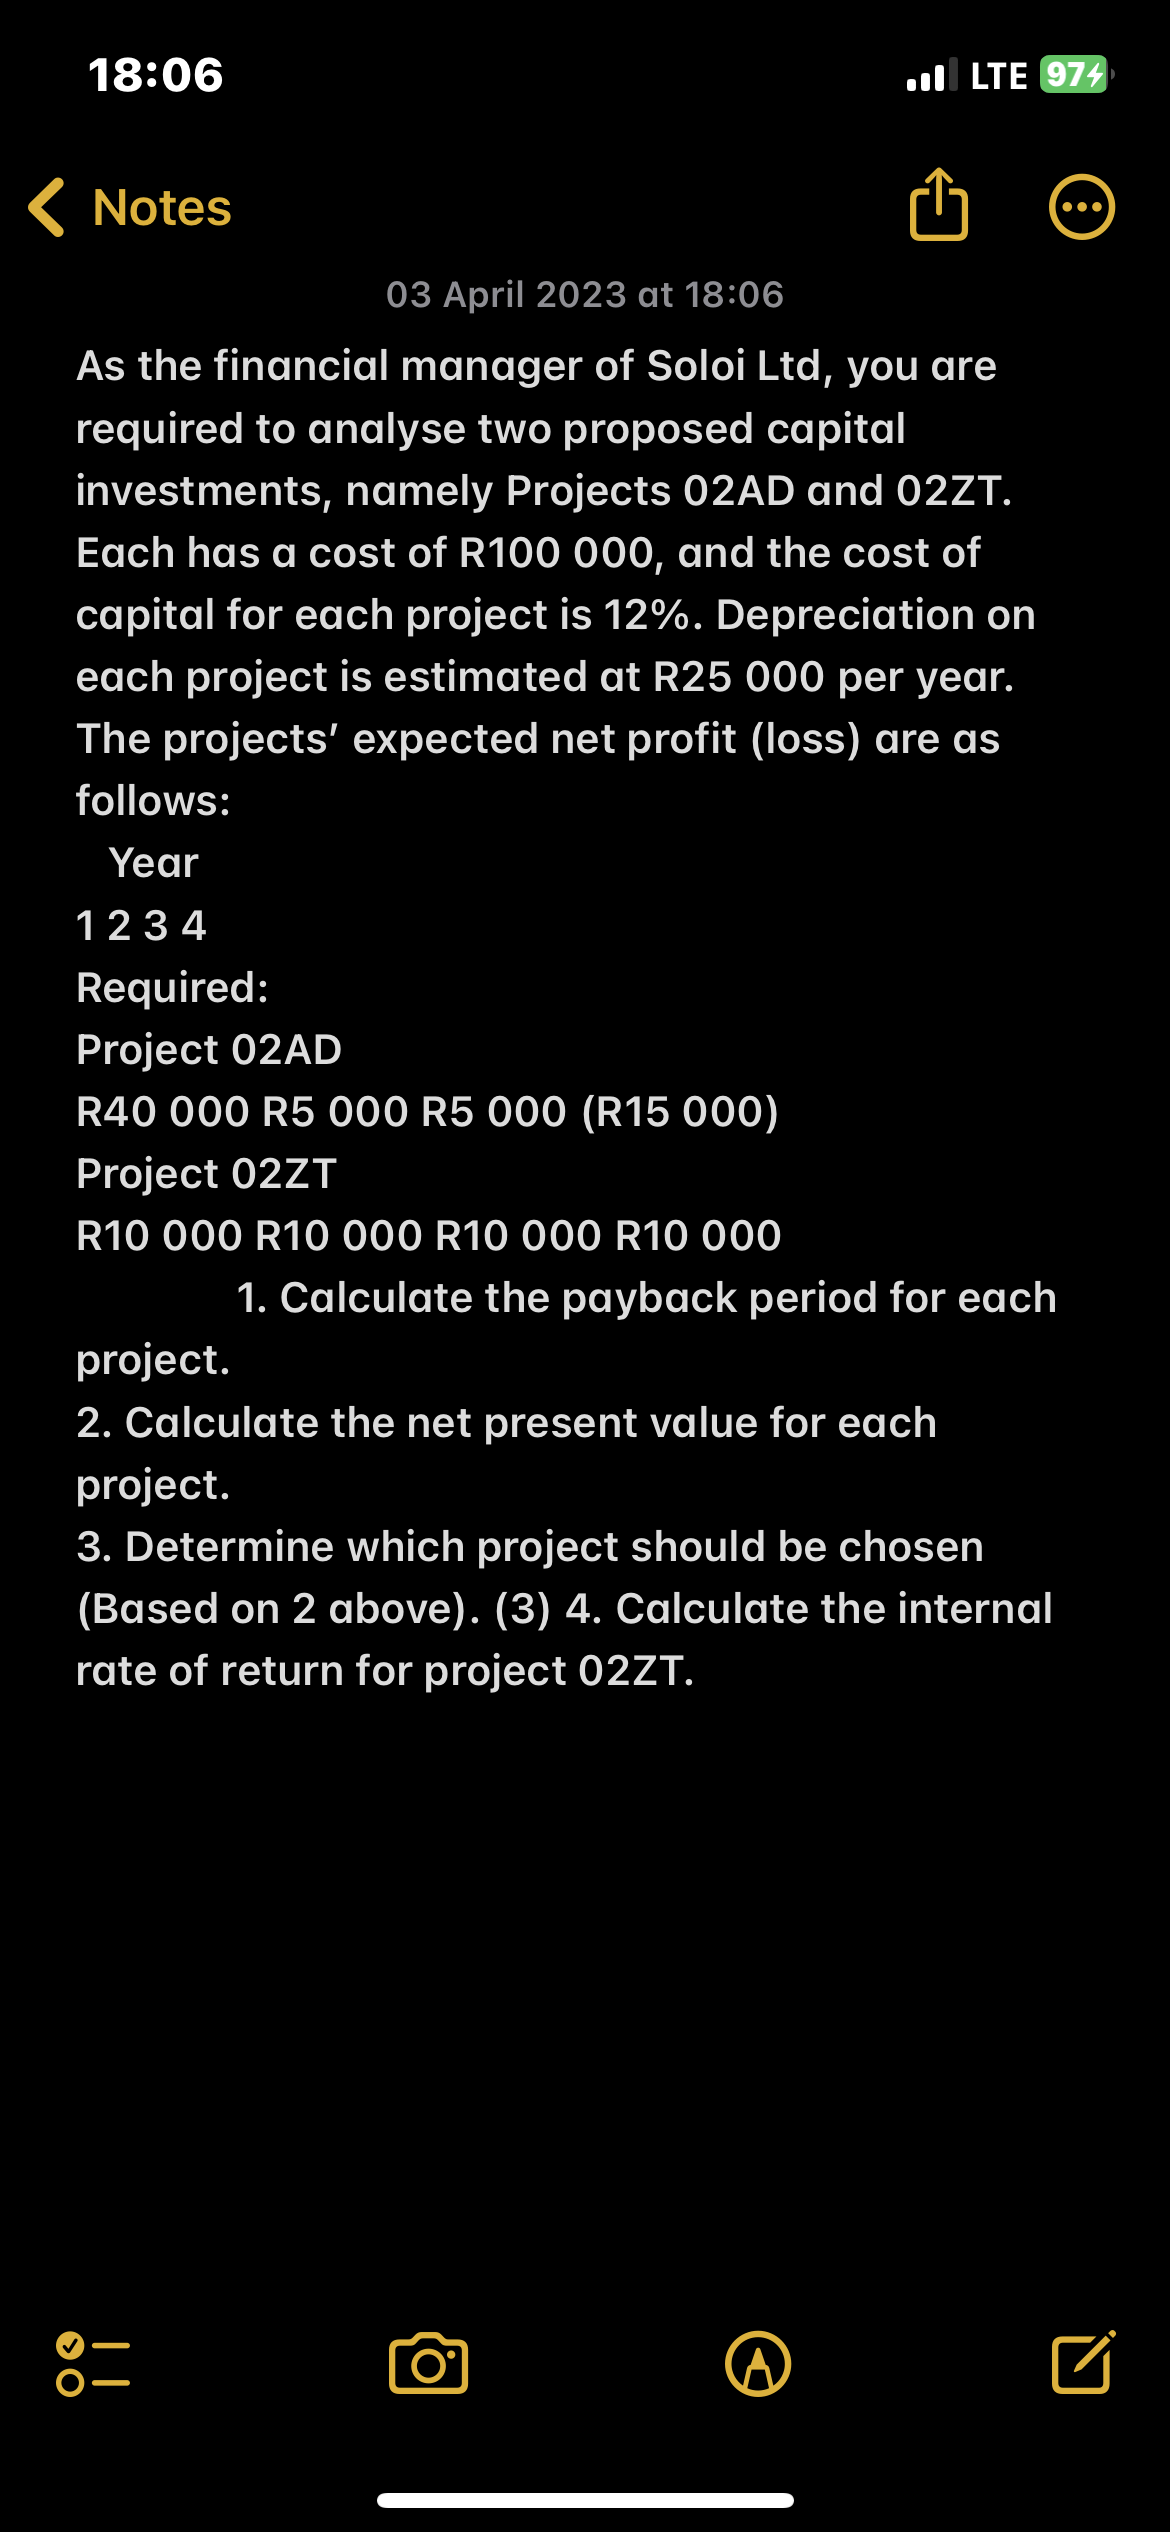 18:06
Notes
03 April 2023 at 18:06
As the financial manager of Soloi Ltd, you are
required to analyse two proposed capital
investments, namely Projects 02AD and 02ZT.
Each has a cost of R100 000, and the cost of
capital for each project is 12%. Depreciation on
each project is estimated at R25 000 per year.
The projects' expected net profit (loss) are as
follows:
Year
1234
Required:
Project 02AD
R40 000 R5 000 R5 000 (R15 000)
Project 02ZT
R10 000 R10 000 R10 000 R10 000
OO
LTE 974
1. Calculate the payback period for each
project.
2. Calculate the net present value for each
project.
3. Determine which project should be chosen
(Based on 2 above). (3) 4. Calculate the internal
rate of return for project 02ZT.
O
●●●